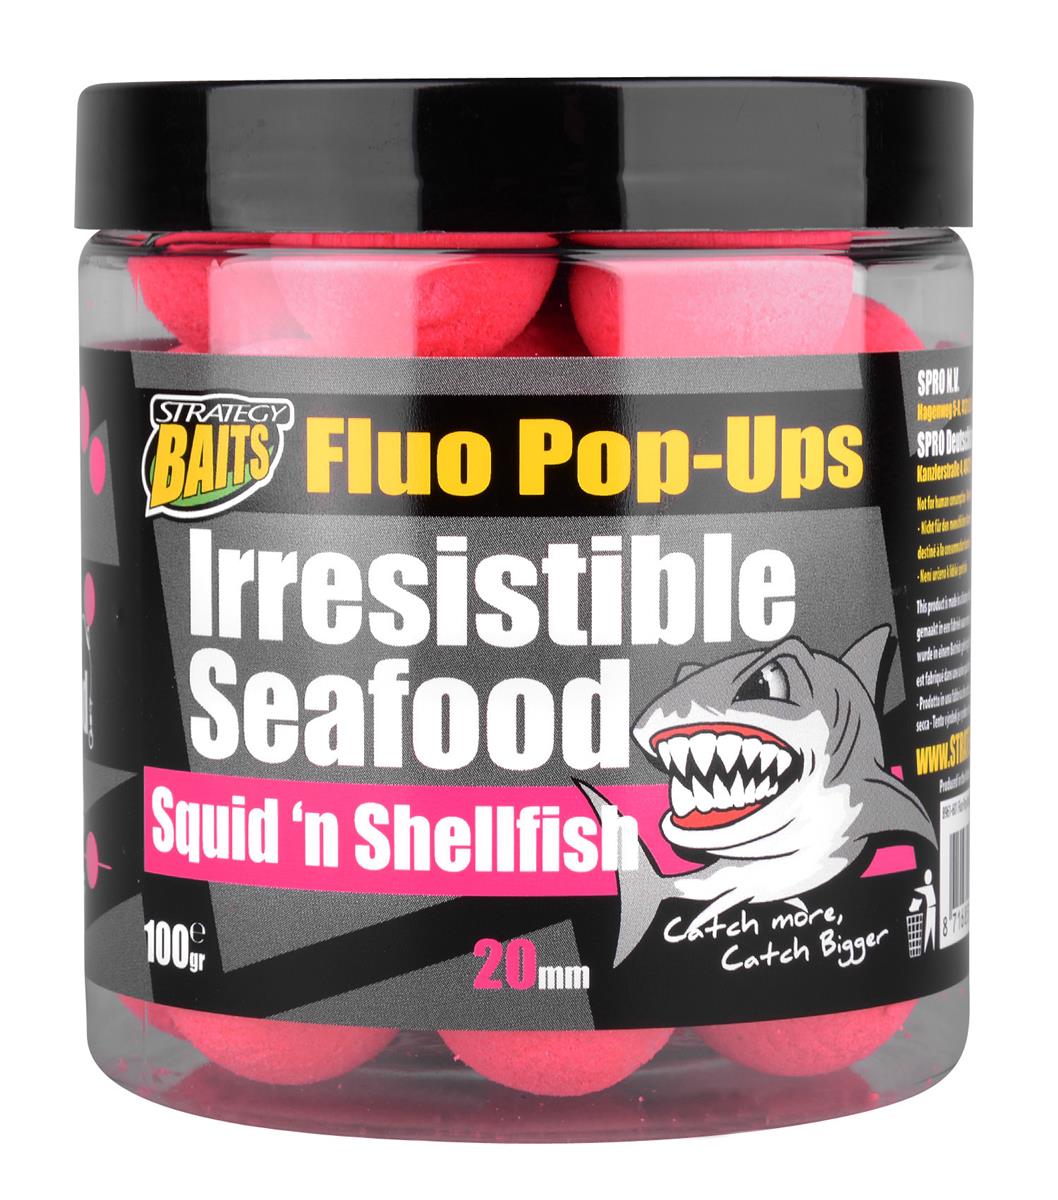 Strategy Baits Fluo Pop-Ups Irresistible Seafood; Salty Krill'n Salmon; ; 20mm;100gr